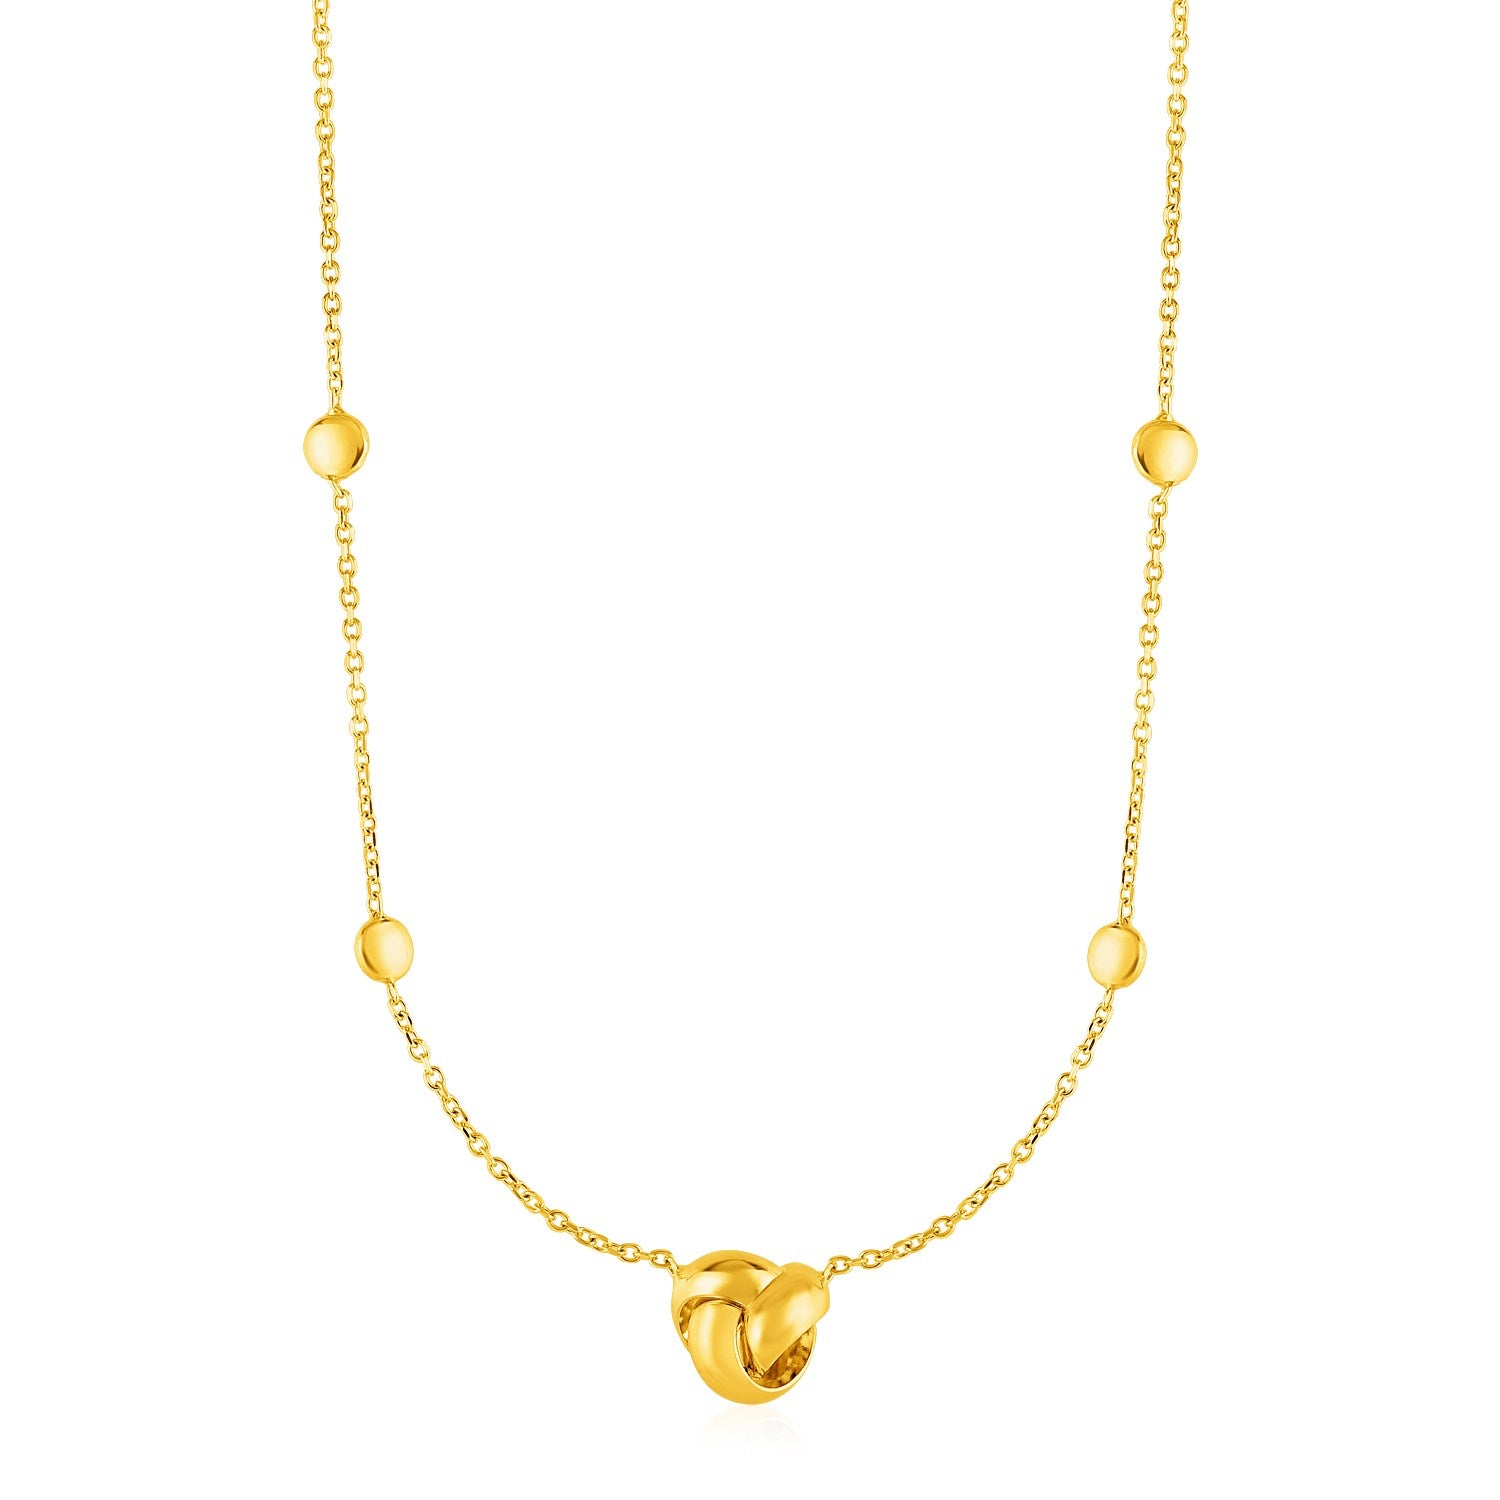 Station Necklace with Love Knot and Round Beads in 14k Yellow Gold